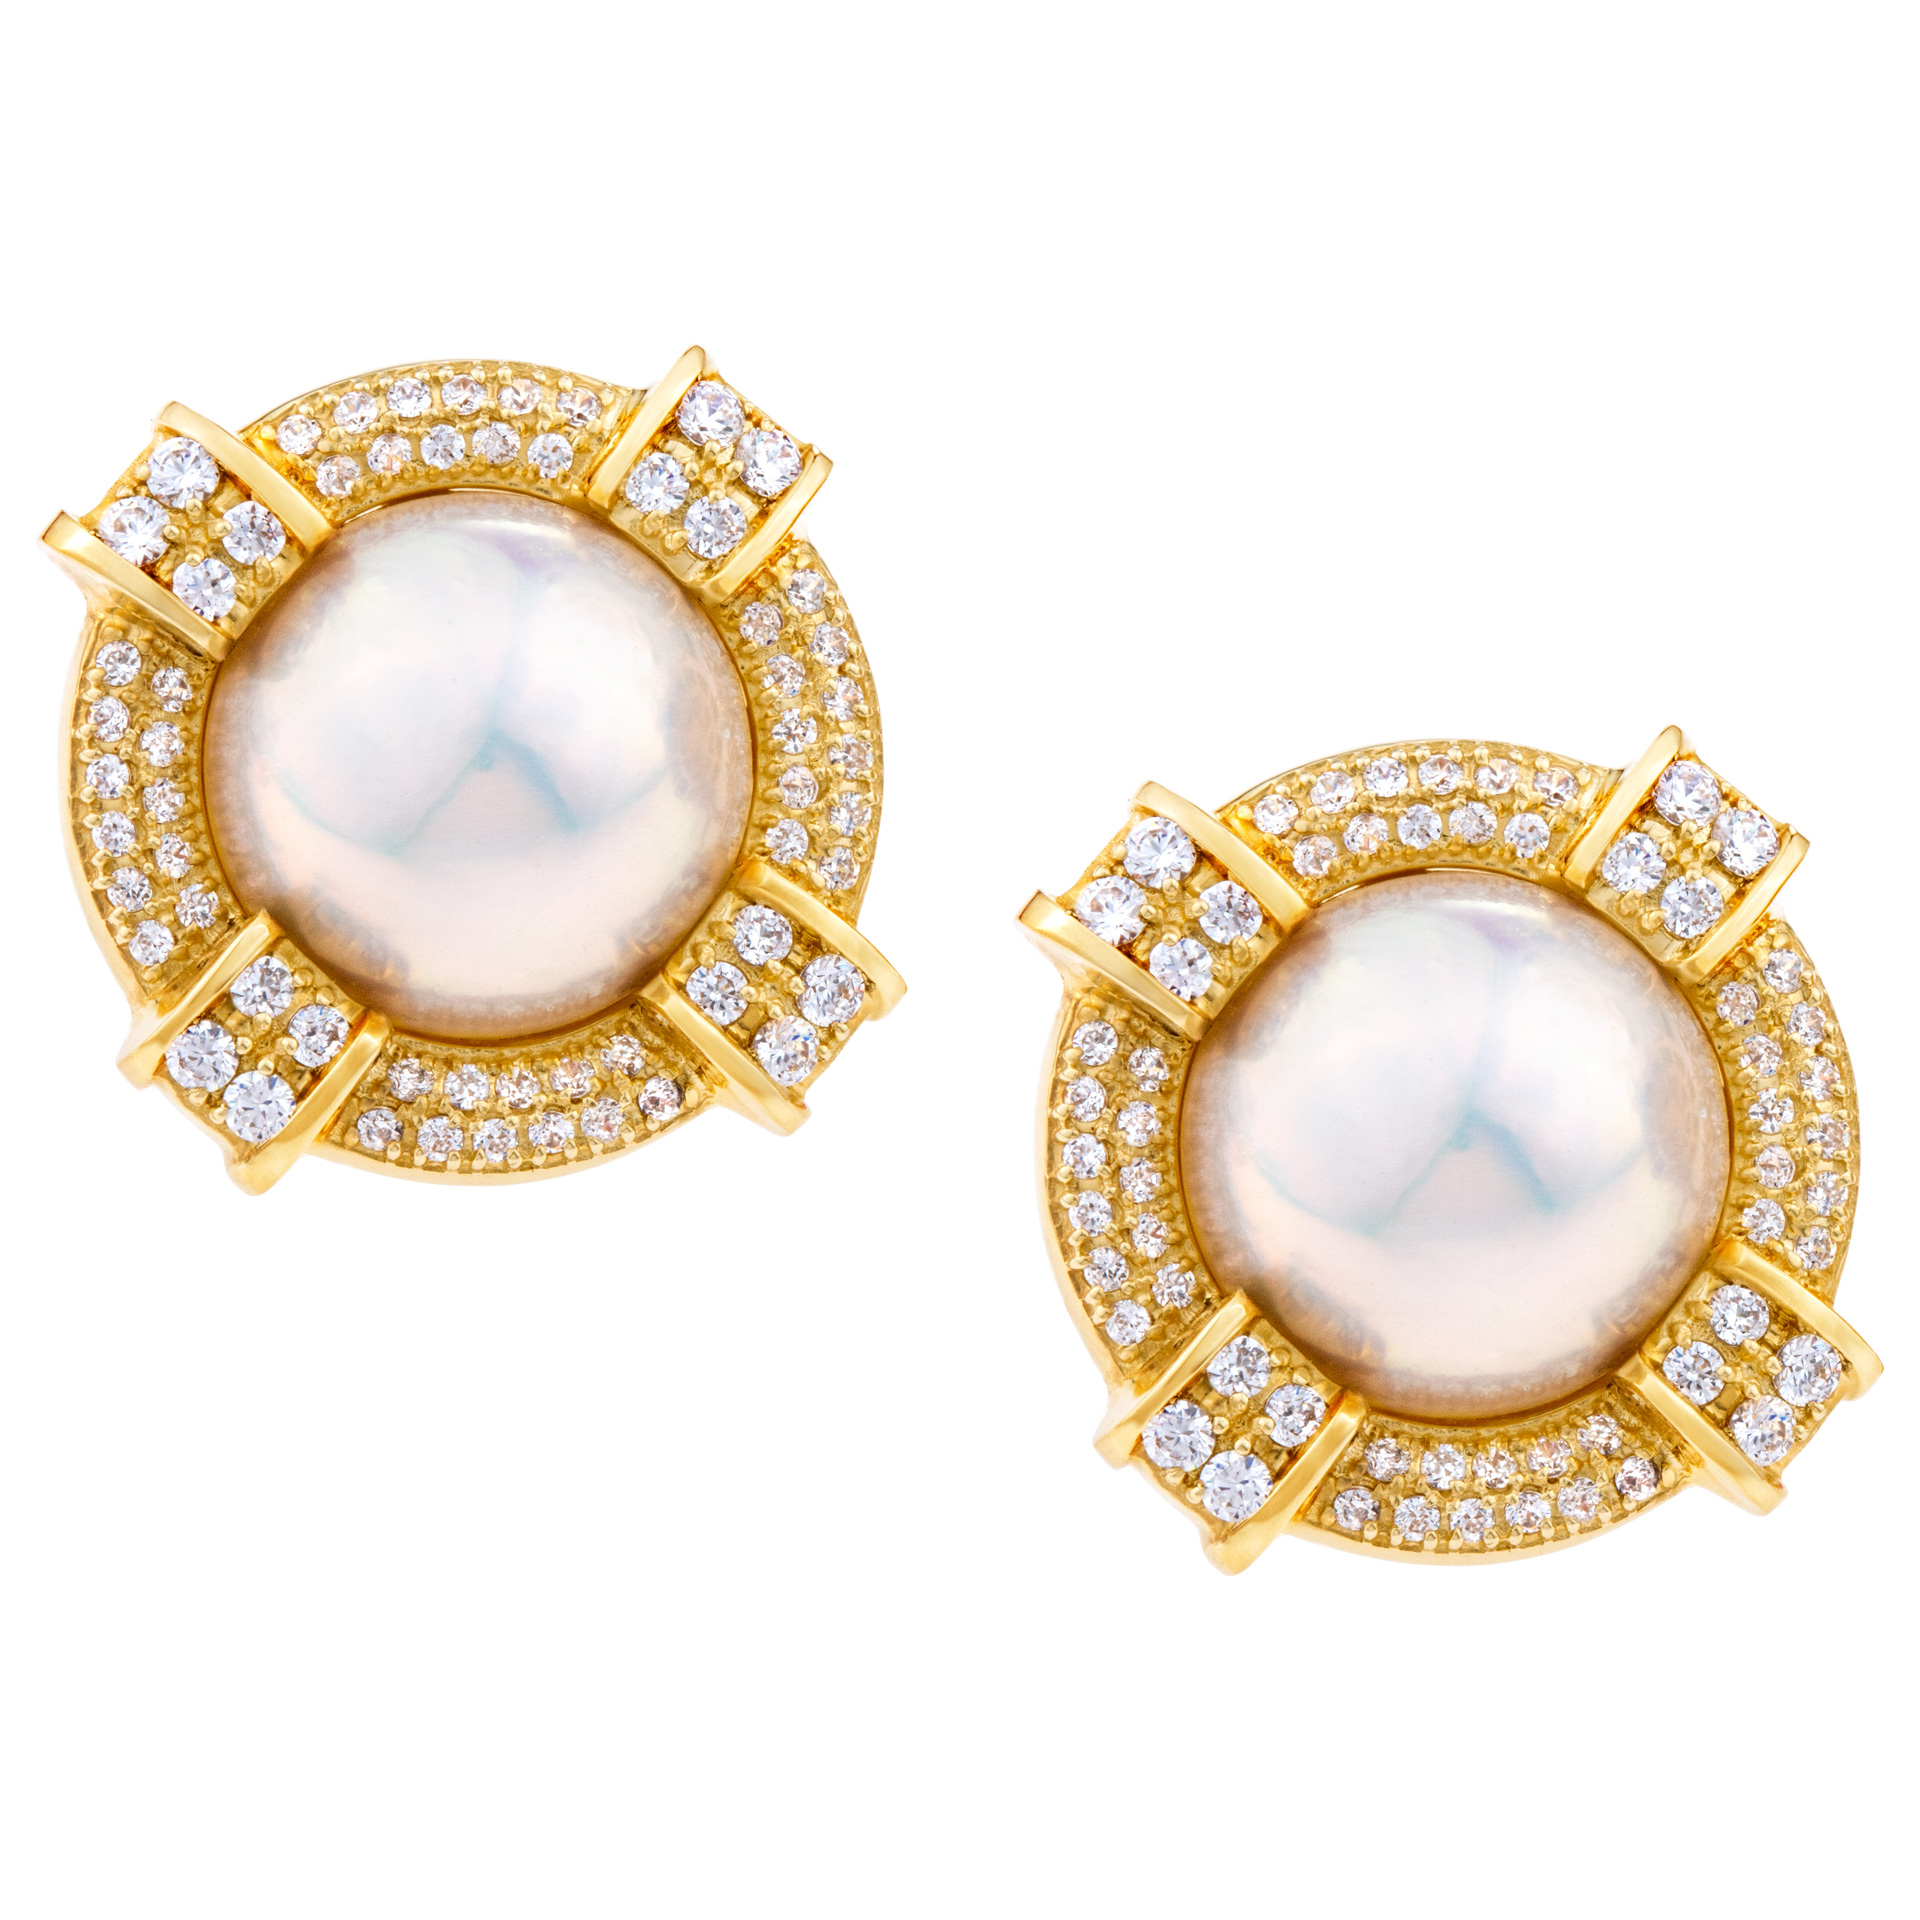 Pearl and diamond earrings in 14k yellow gold image 1